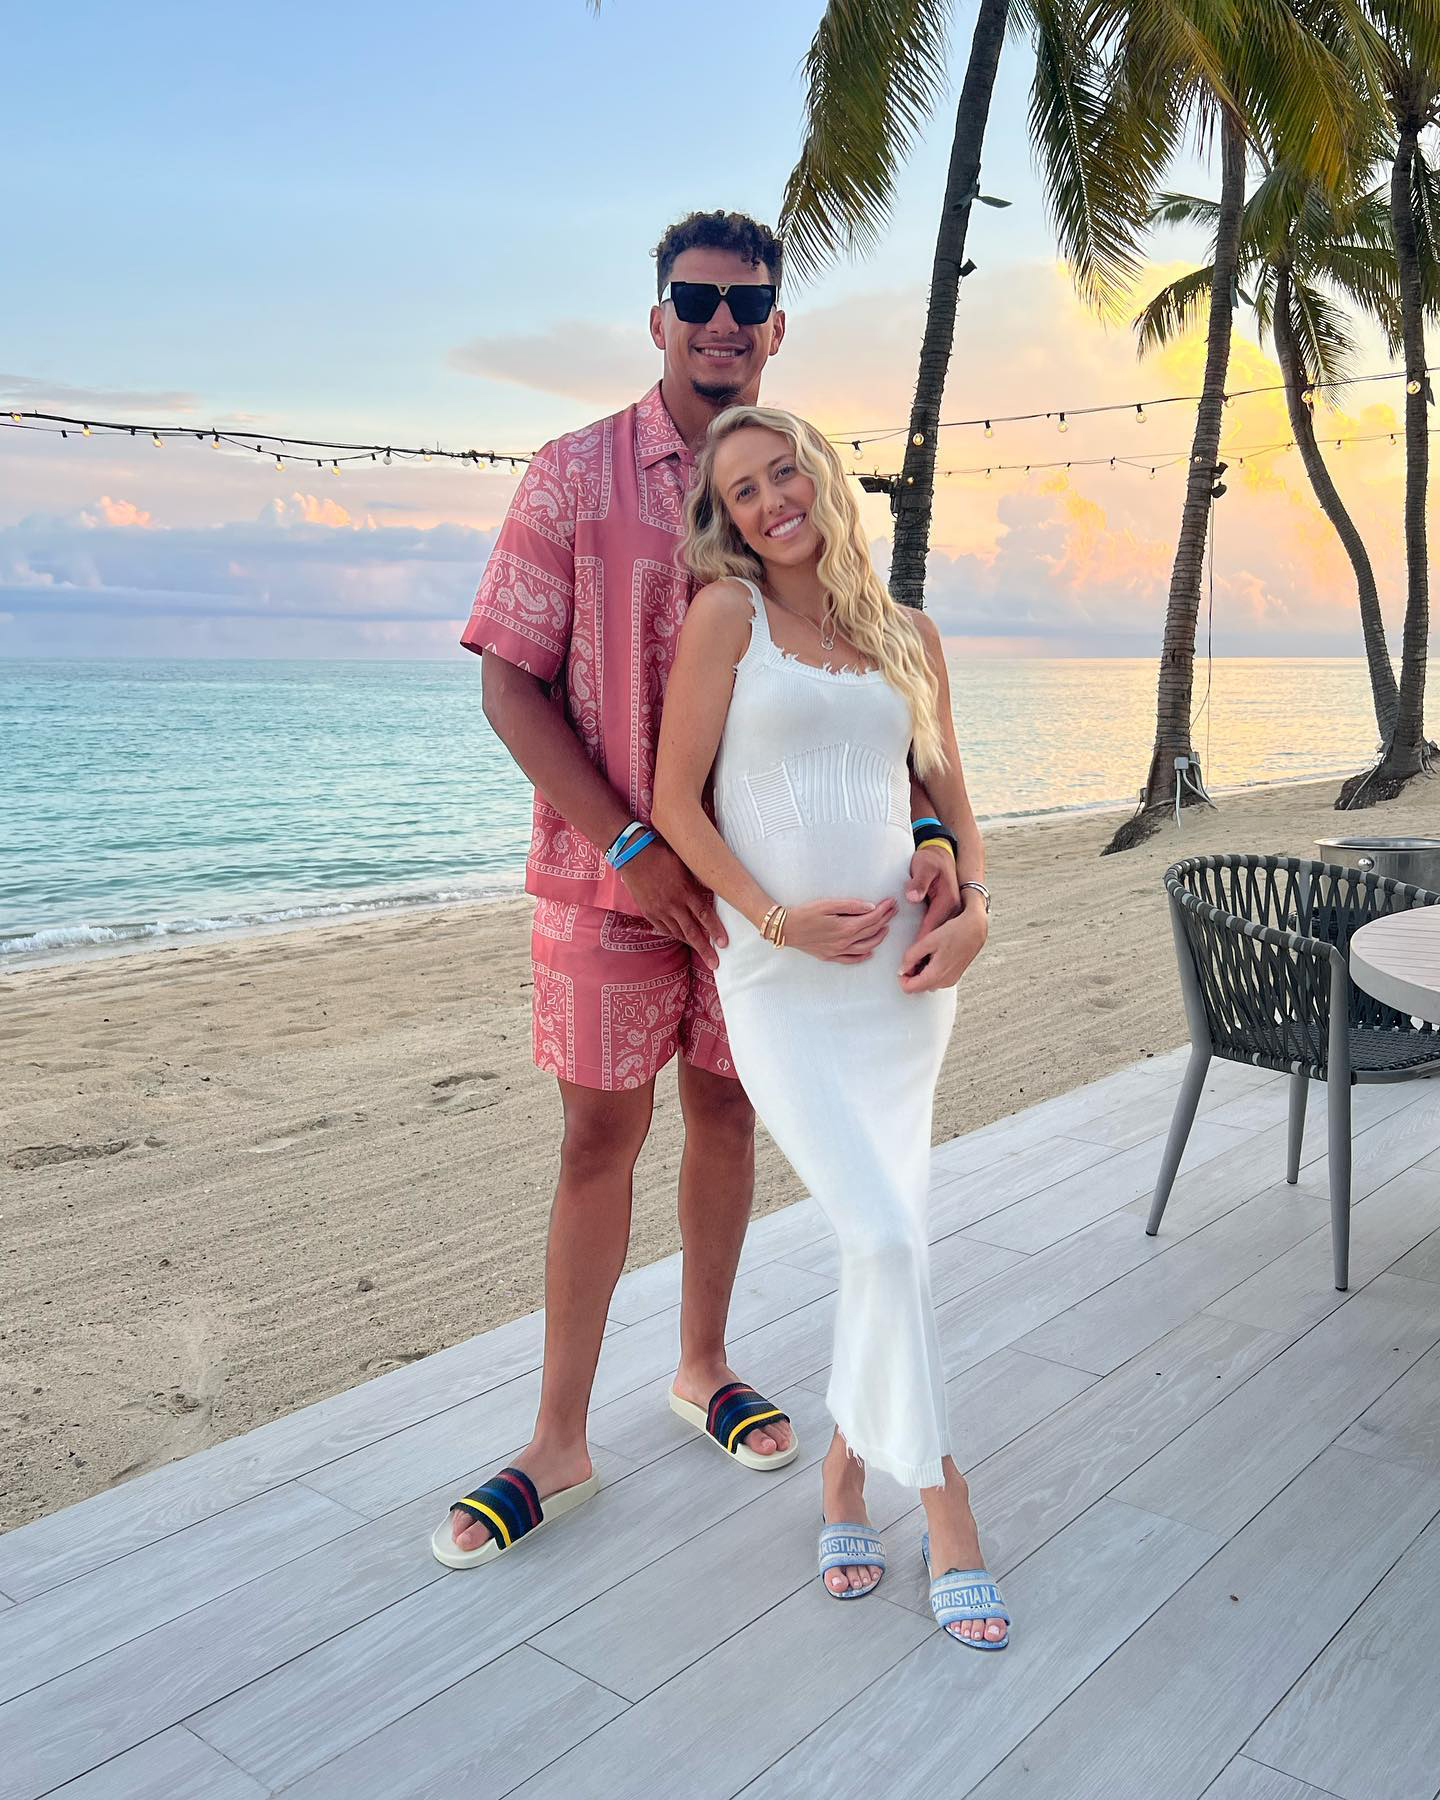 Patrick Mahomes, wife Brittany Matthews reveal gender of baby